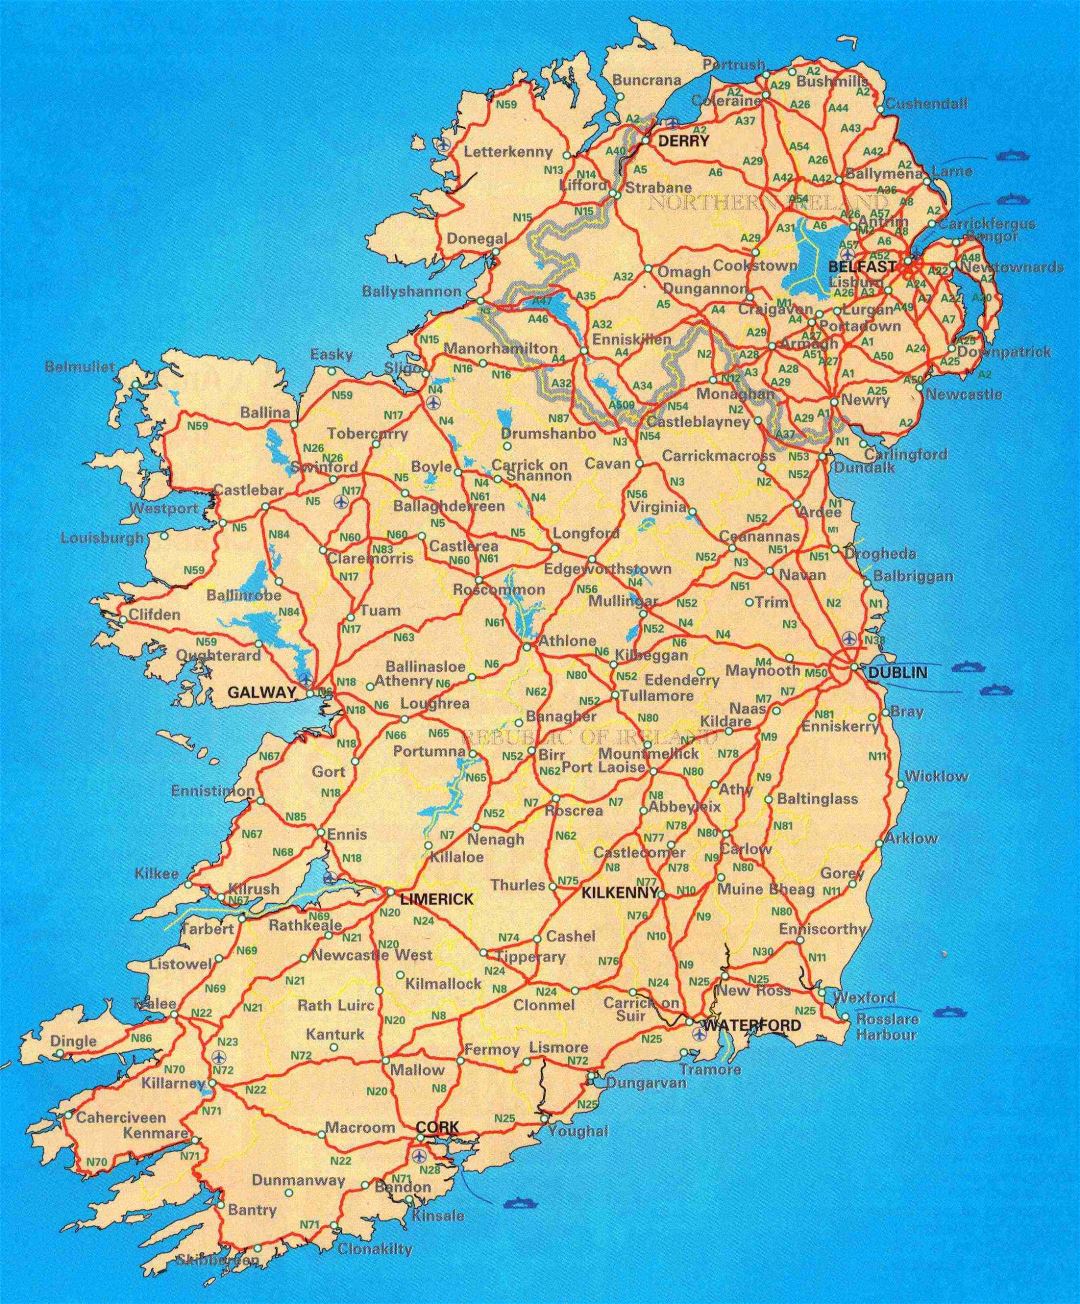 Large scale road map of Ireland